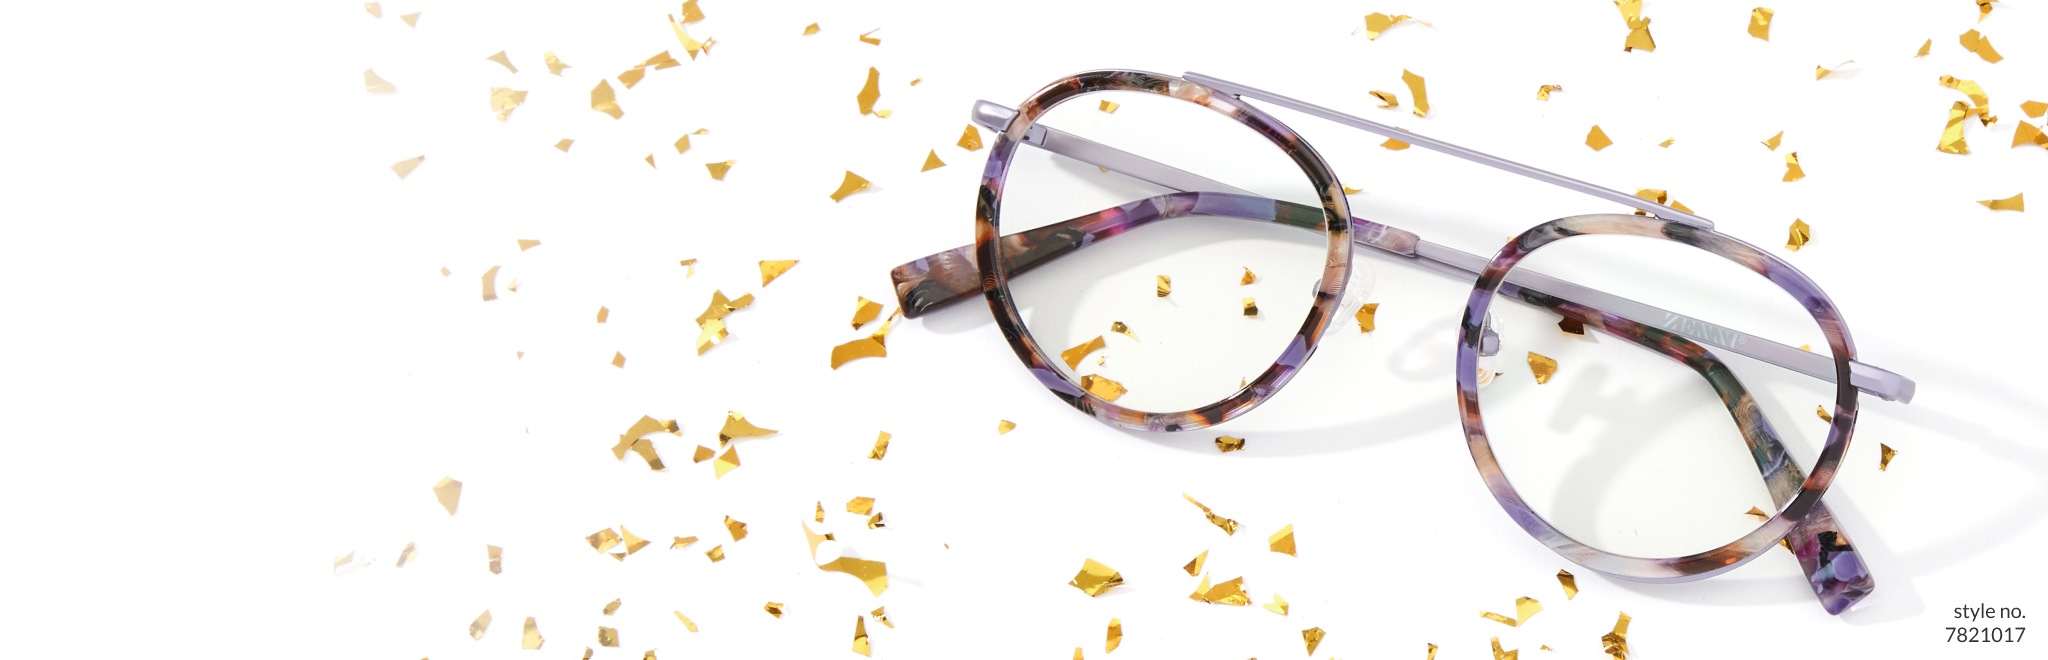 Image of Zenni round glasses #7821017 against a white background, with gold glitter sprinkled all around them.